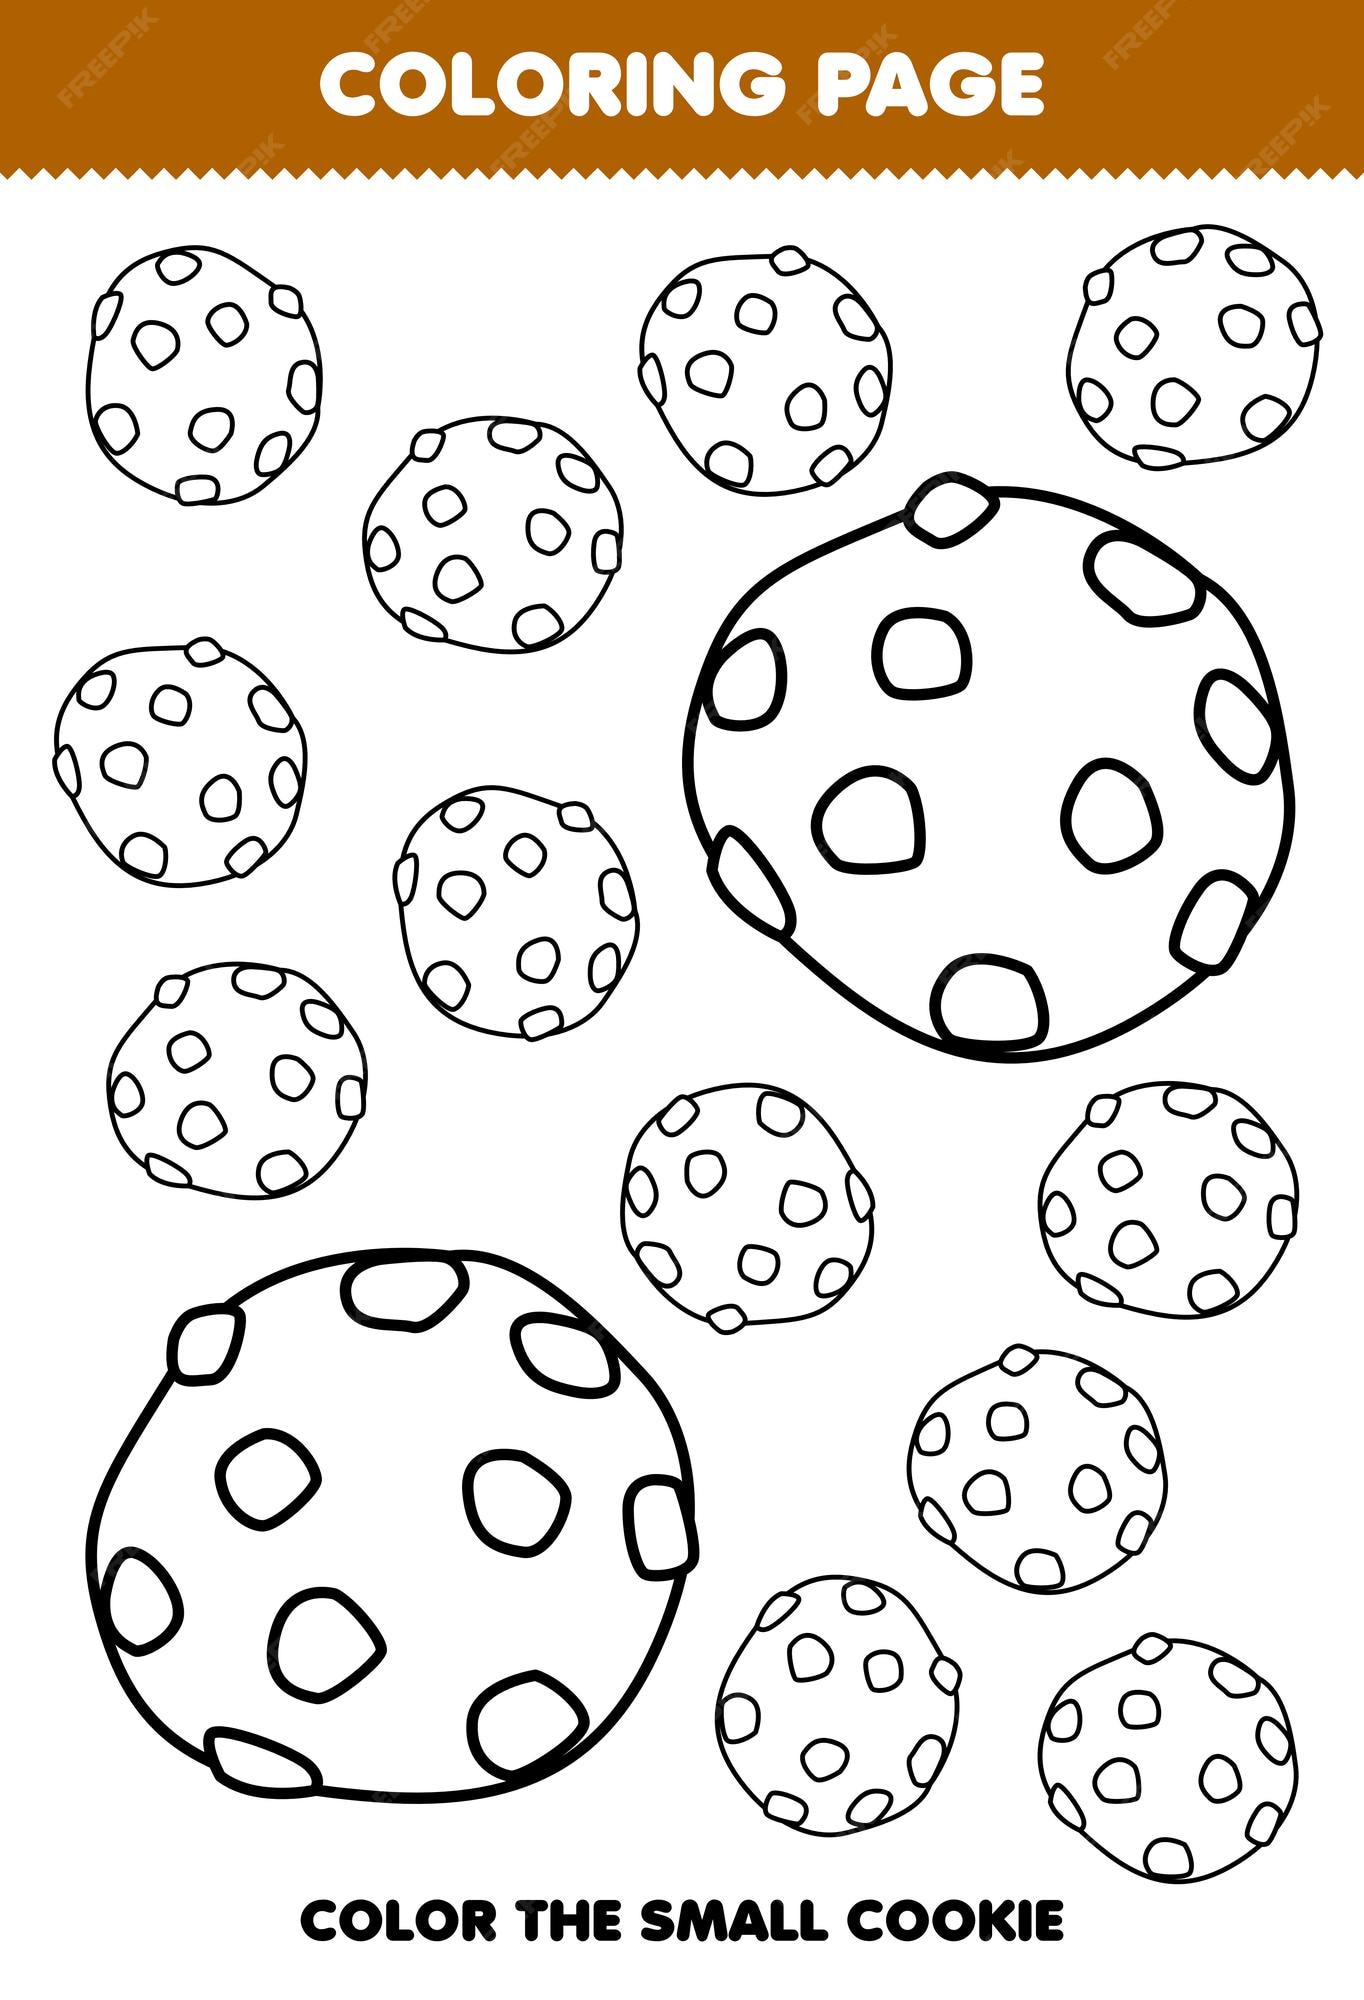 Premium vector education game for children coloring page big or small picture of cookie printable worksheet